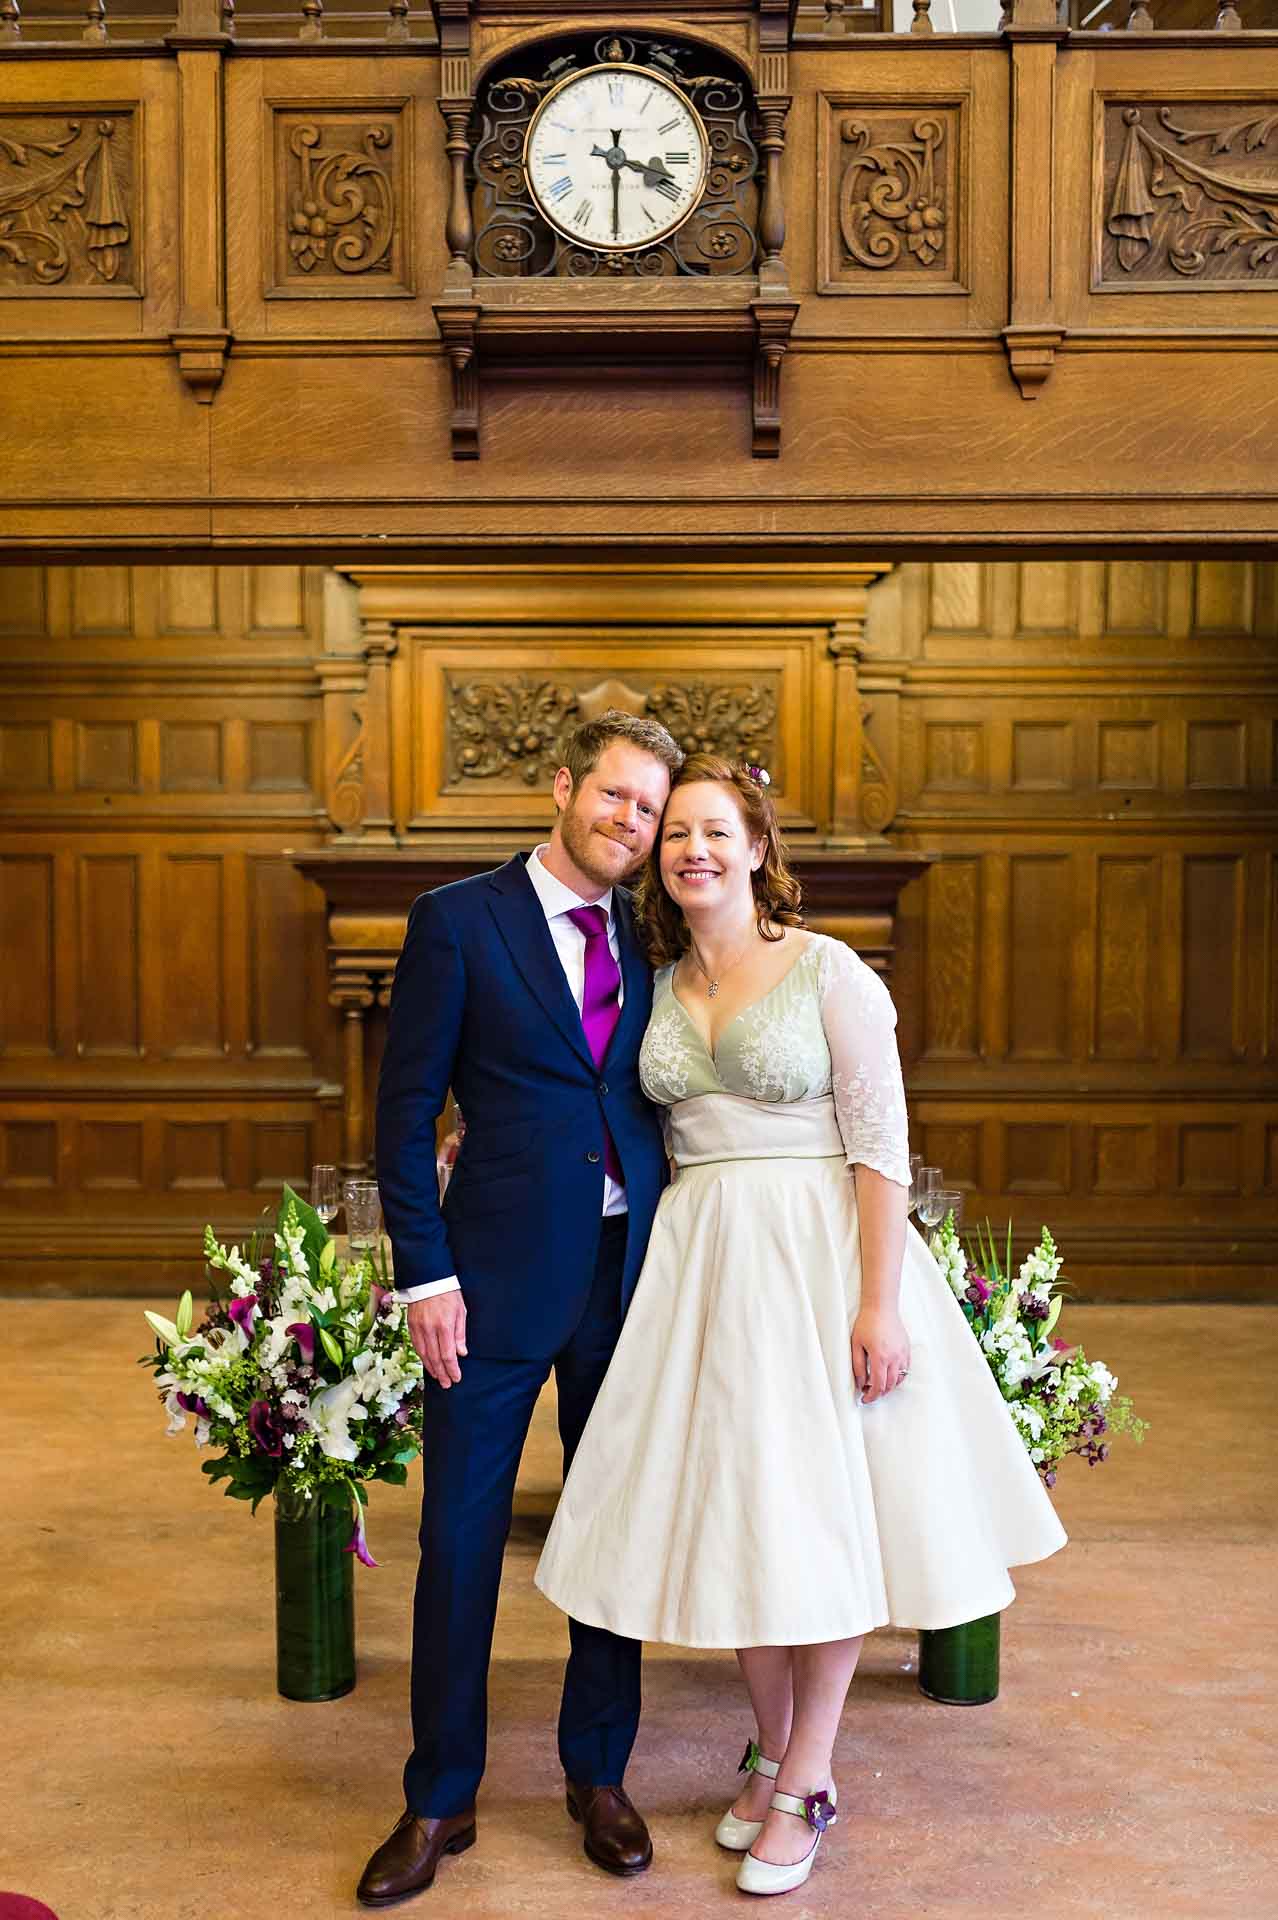 Portrait of Bride and Groom with Clock at Chiswick Town Hall